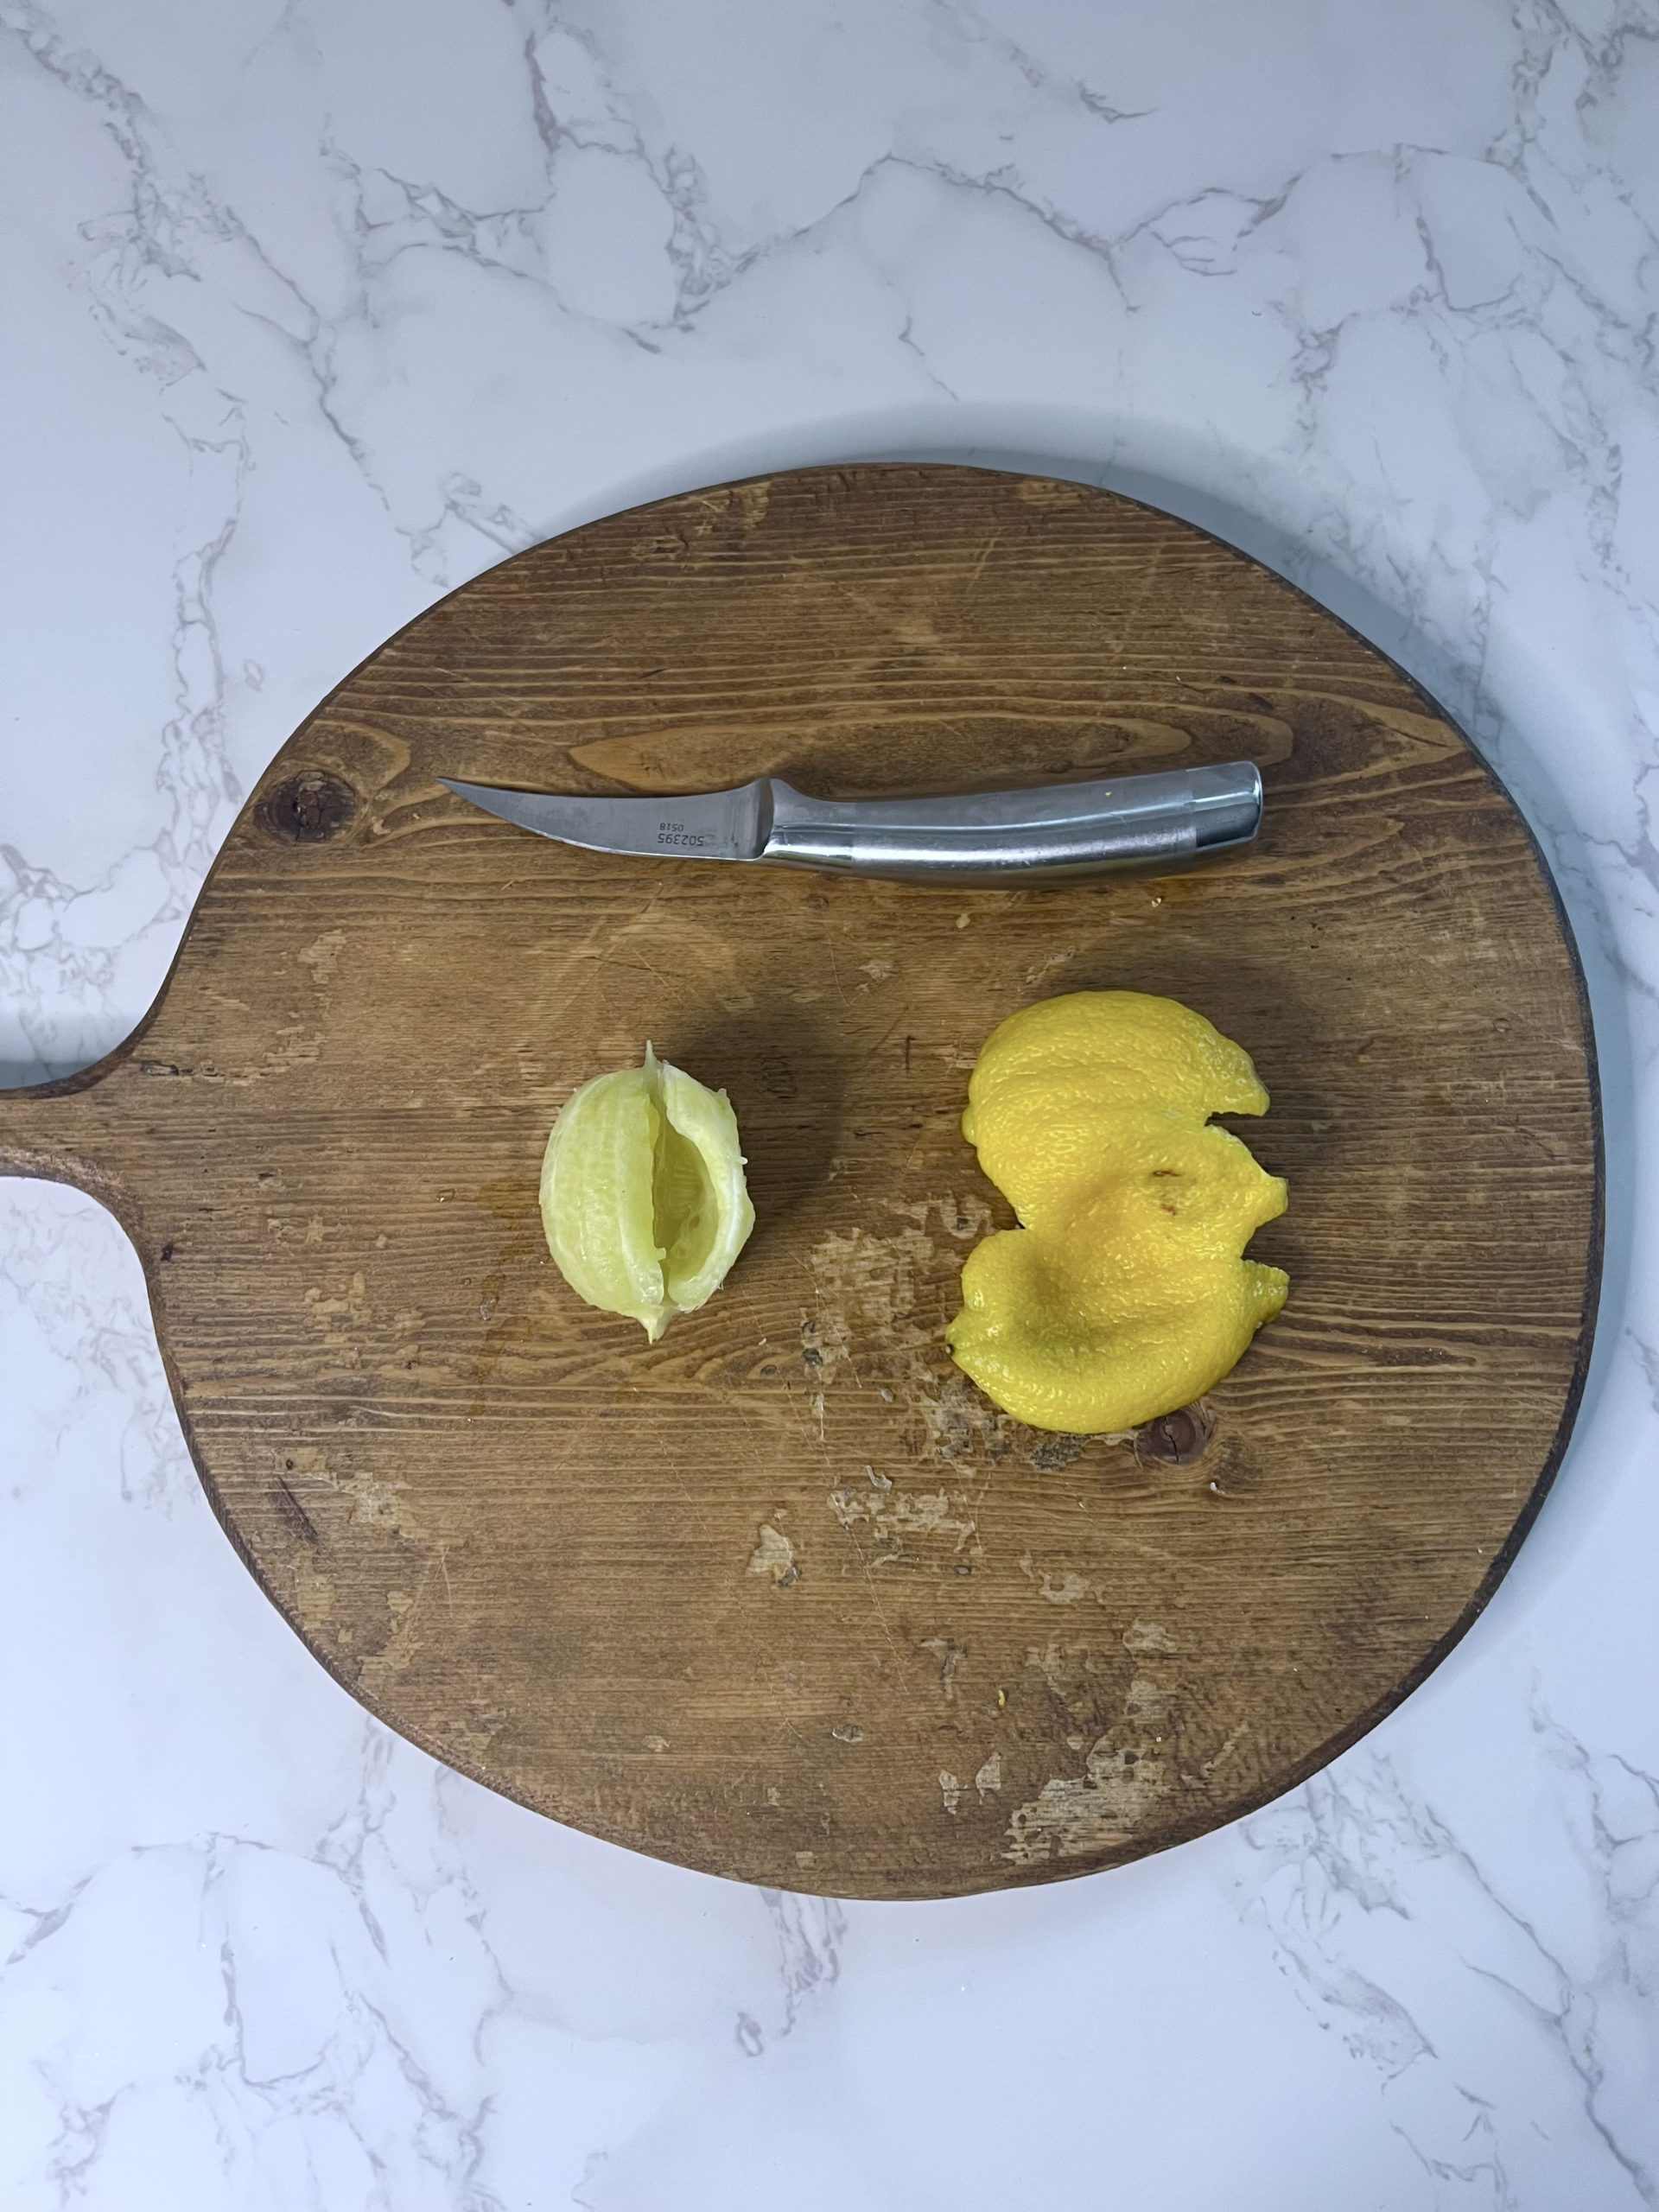 A knife, a peeled lemon, and an entire lemon peel on a wooden cutting board.